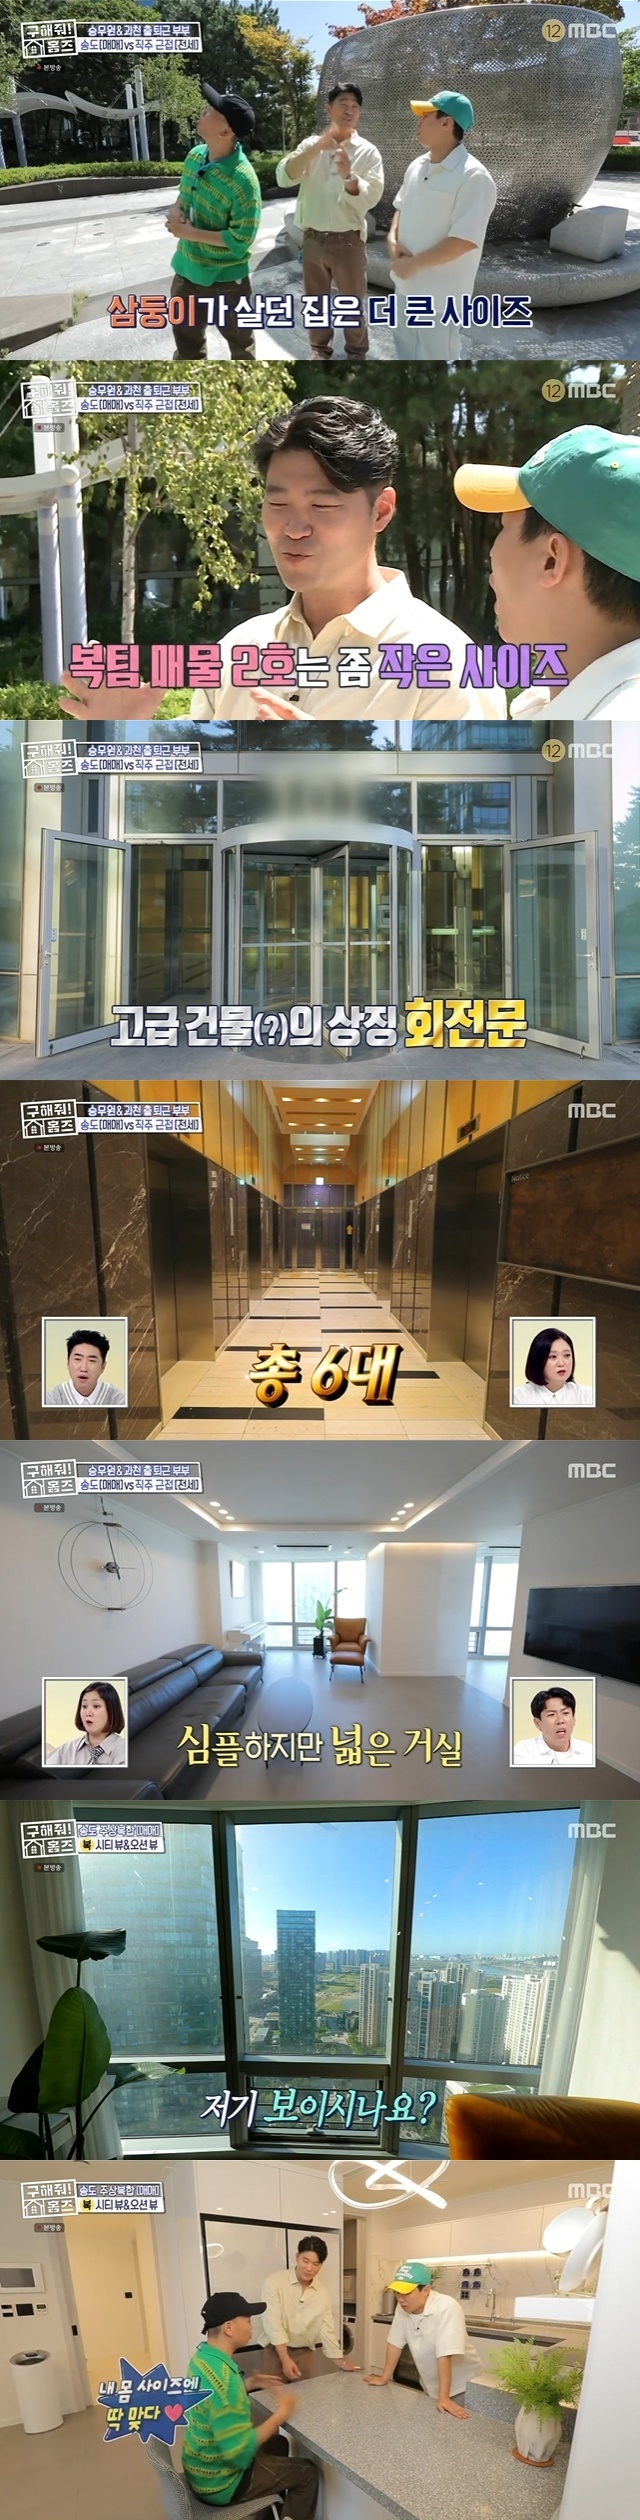 A little small sale of the Apartment, where Song Il-gook and his son Three Twins lived, was introduced.In the 175th MBC entertainment Where is My Home (hereinafter referred to as Homes) broadcast on September 25, a couple client appeared looking for a house in southern Konggi near Song or Gwacheon.The budget was 900 million won for Song International City and 600 million won for the southern part of Kyonggi.On this day, Yang Se-hyeong, Dynamic Duo Gaeko and Choiza visited Song International Citys first tool.In the area with the International Business District and the International School, Songs landmark Central Park was within two minutes walk.Park Na-rae commented on this place, This is like Singapore and it is like Hong Kong.Even this house had its own relationship with entertainers: According to Yang Se-hyeong, there is Kim Kwang-gyus house on the walk.Cody, who saw the residential complex Apartment building, was surprised to see that it was a famous place. It was the house where Song Il-gooks triplet son, the Republic of Korea, and the old age lived. (Three Twins house) is a big size and (this sale) is a small size in the same building, Choiza said, surprised by Park Na-rae, do you come in the budget?Even the house had a hotel-class lobby and six elevators on the revolving door, a symbol of a luxury building.